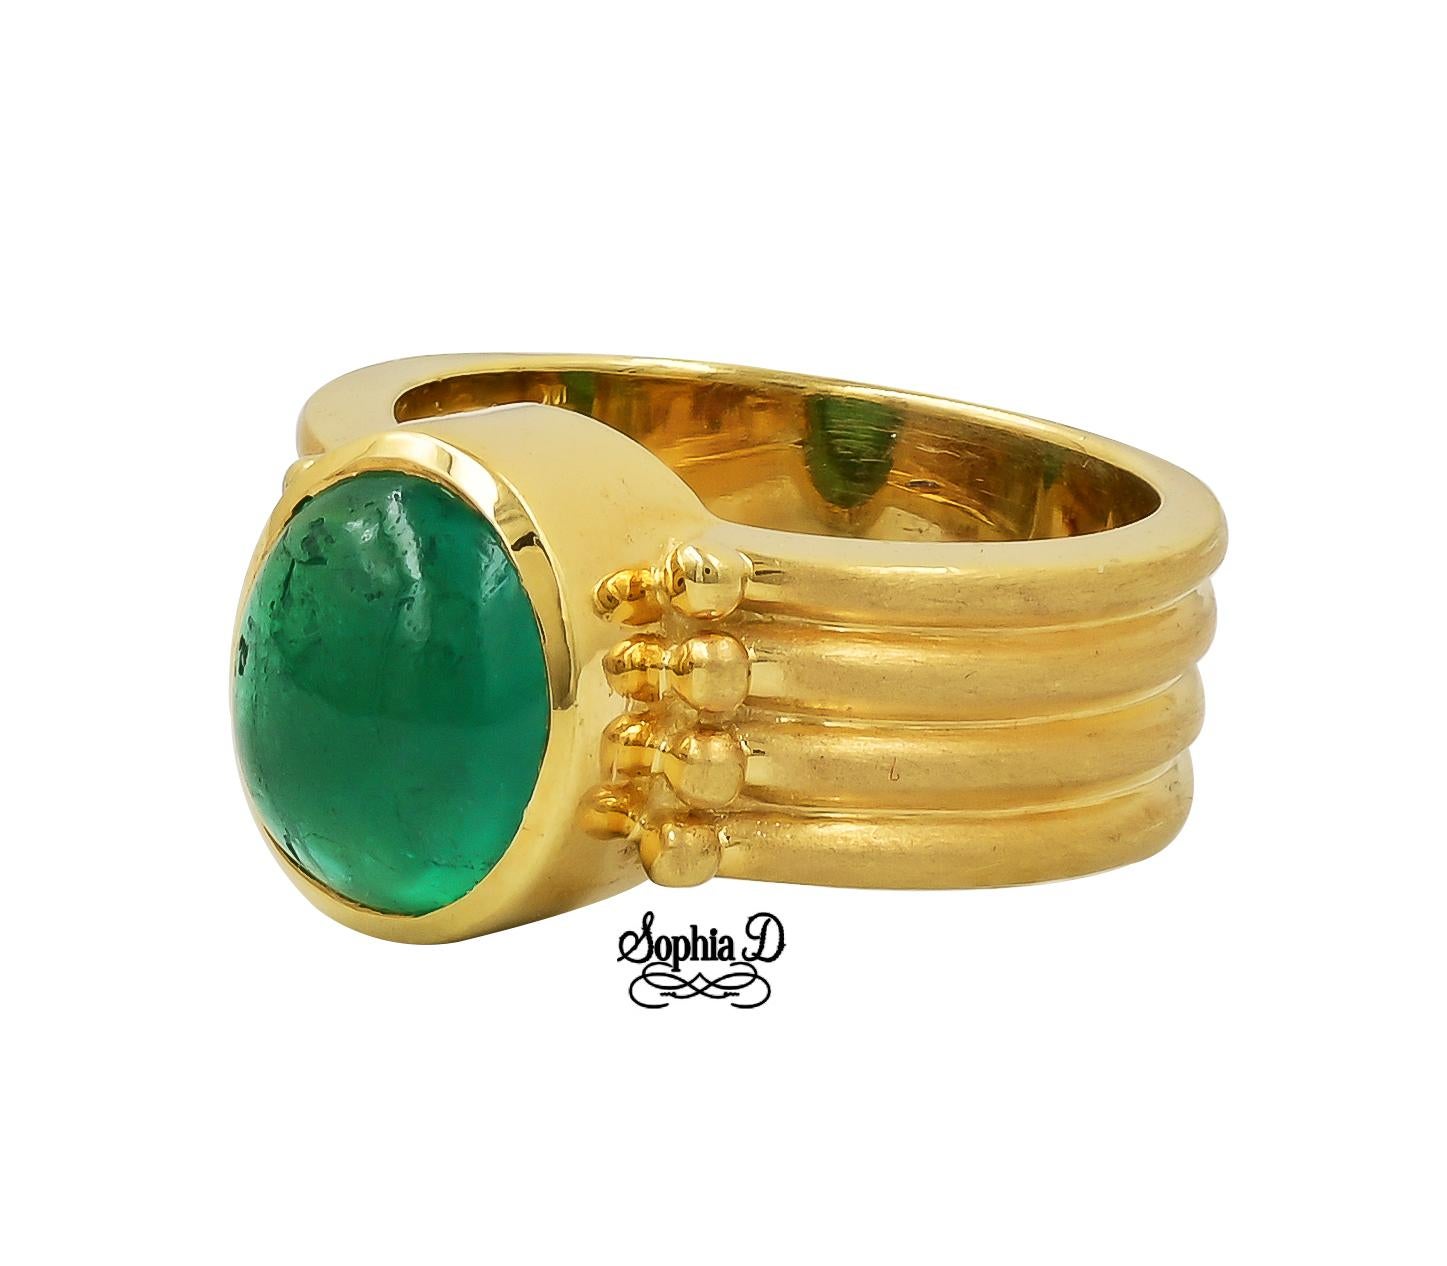 Emerald ring set in 18K yellow gold.

Sophia D by Joseph Dardashti LTD has been known worldwide for 35 years and are inspired by classic Art Deco design that merges with modern manufacturing techniques.  